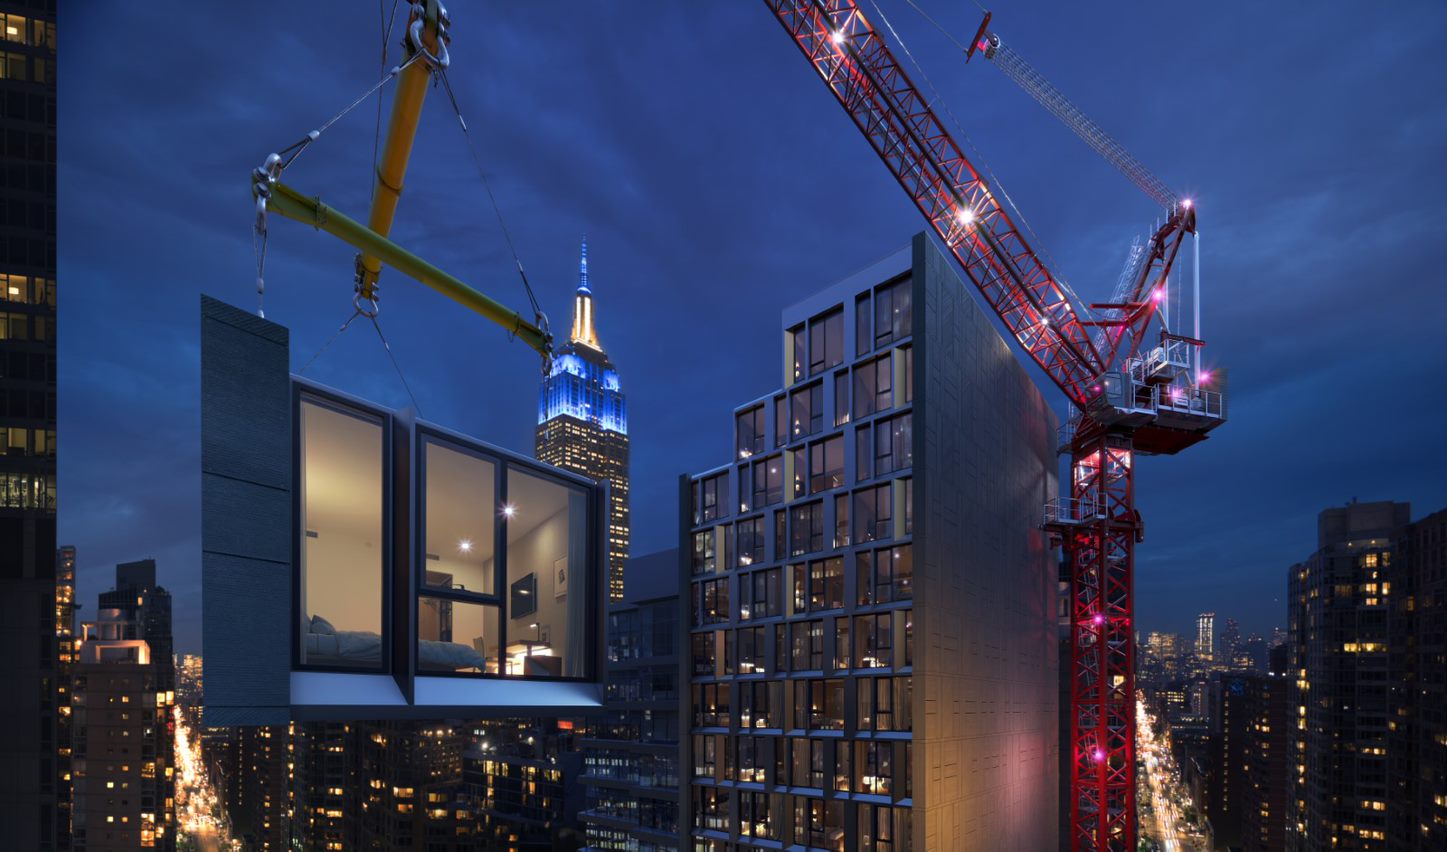 Marriot’s modular hotel, The AC Hotel New York NoMad